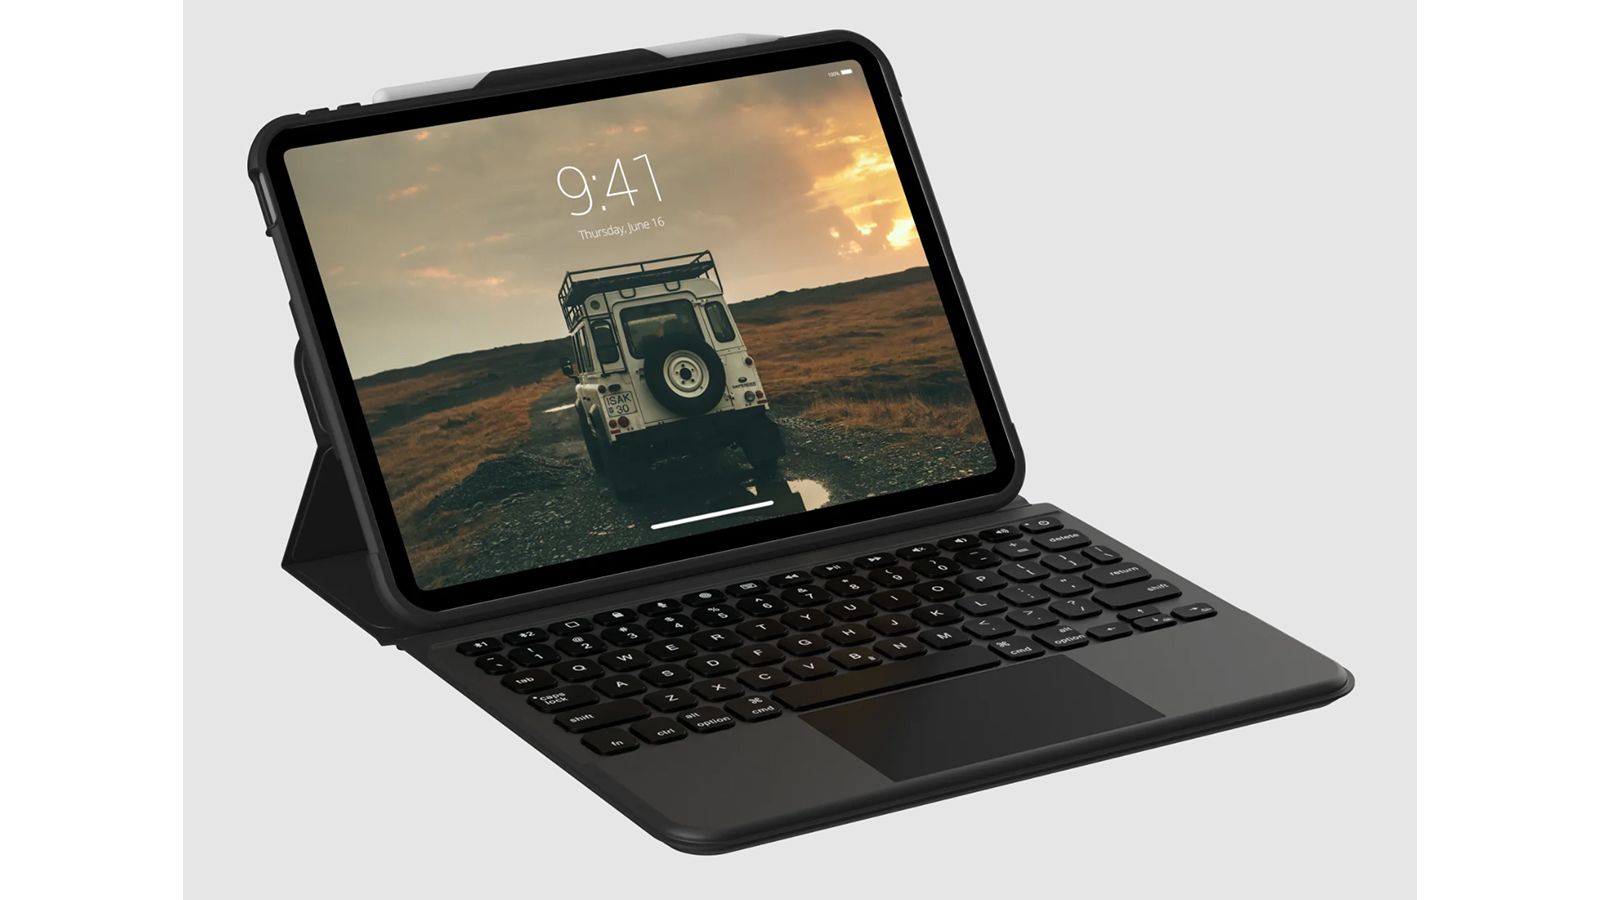 iPad Keyboards and Cases